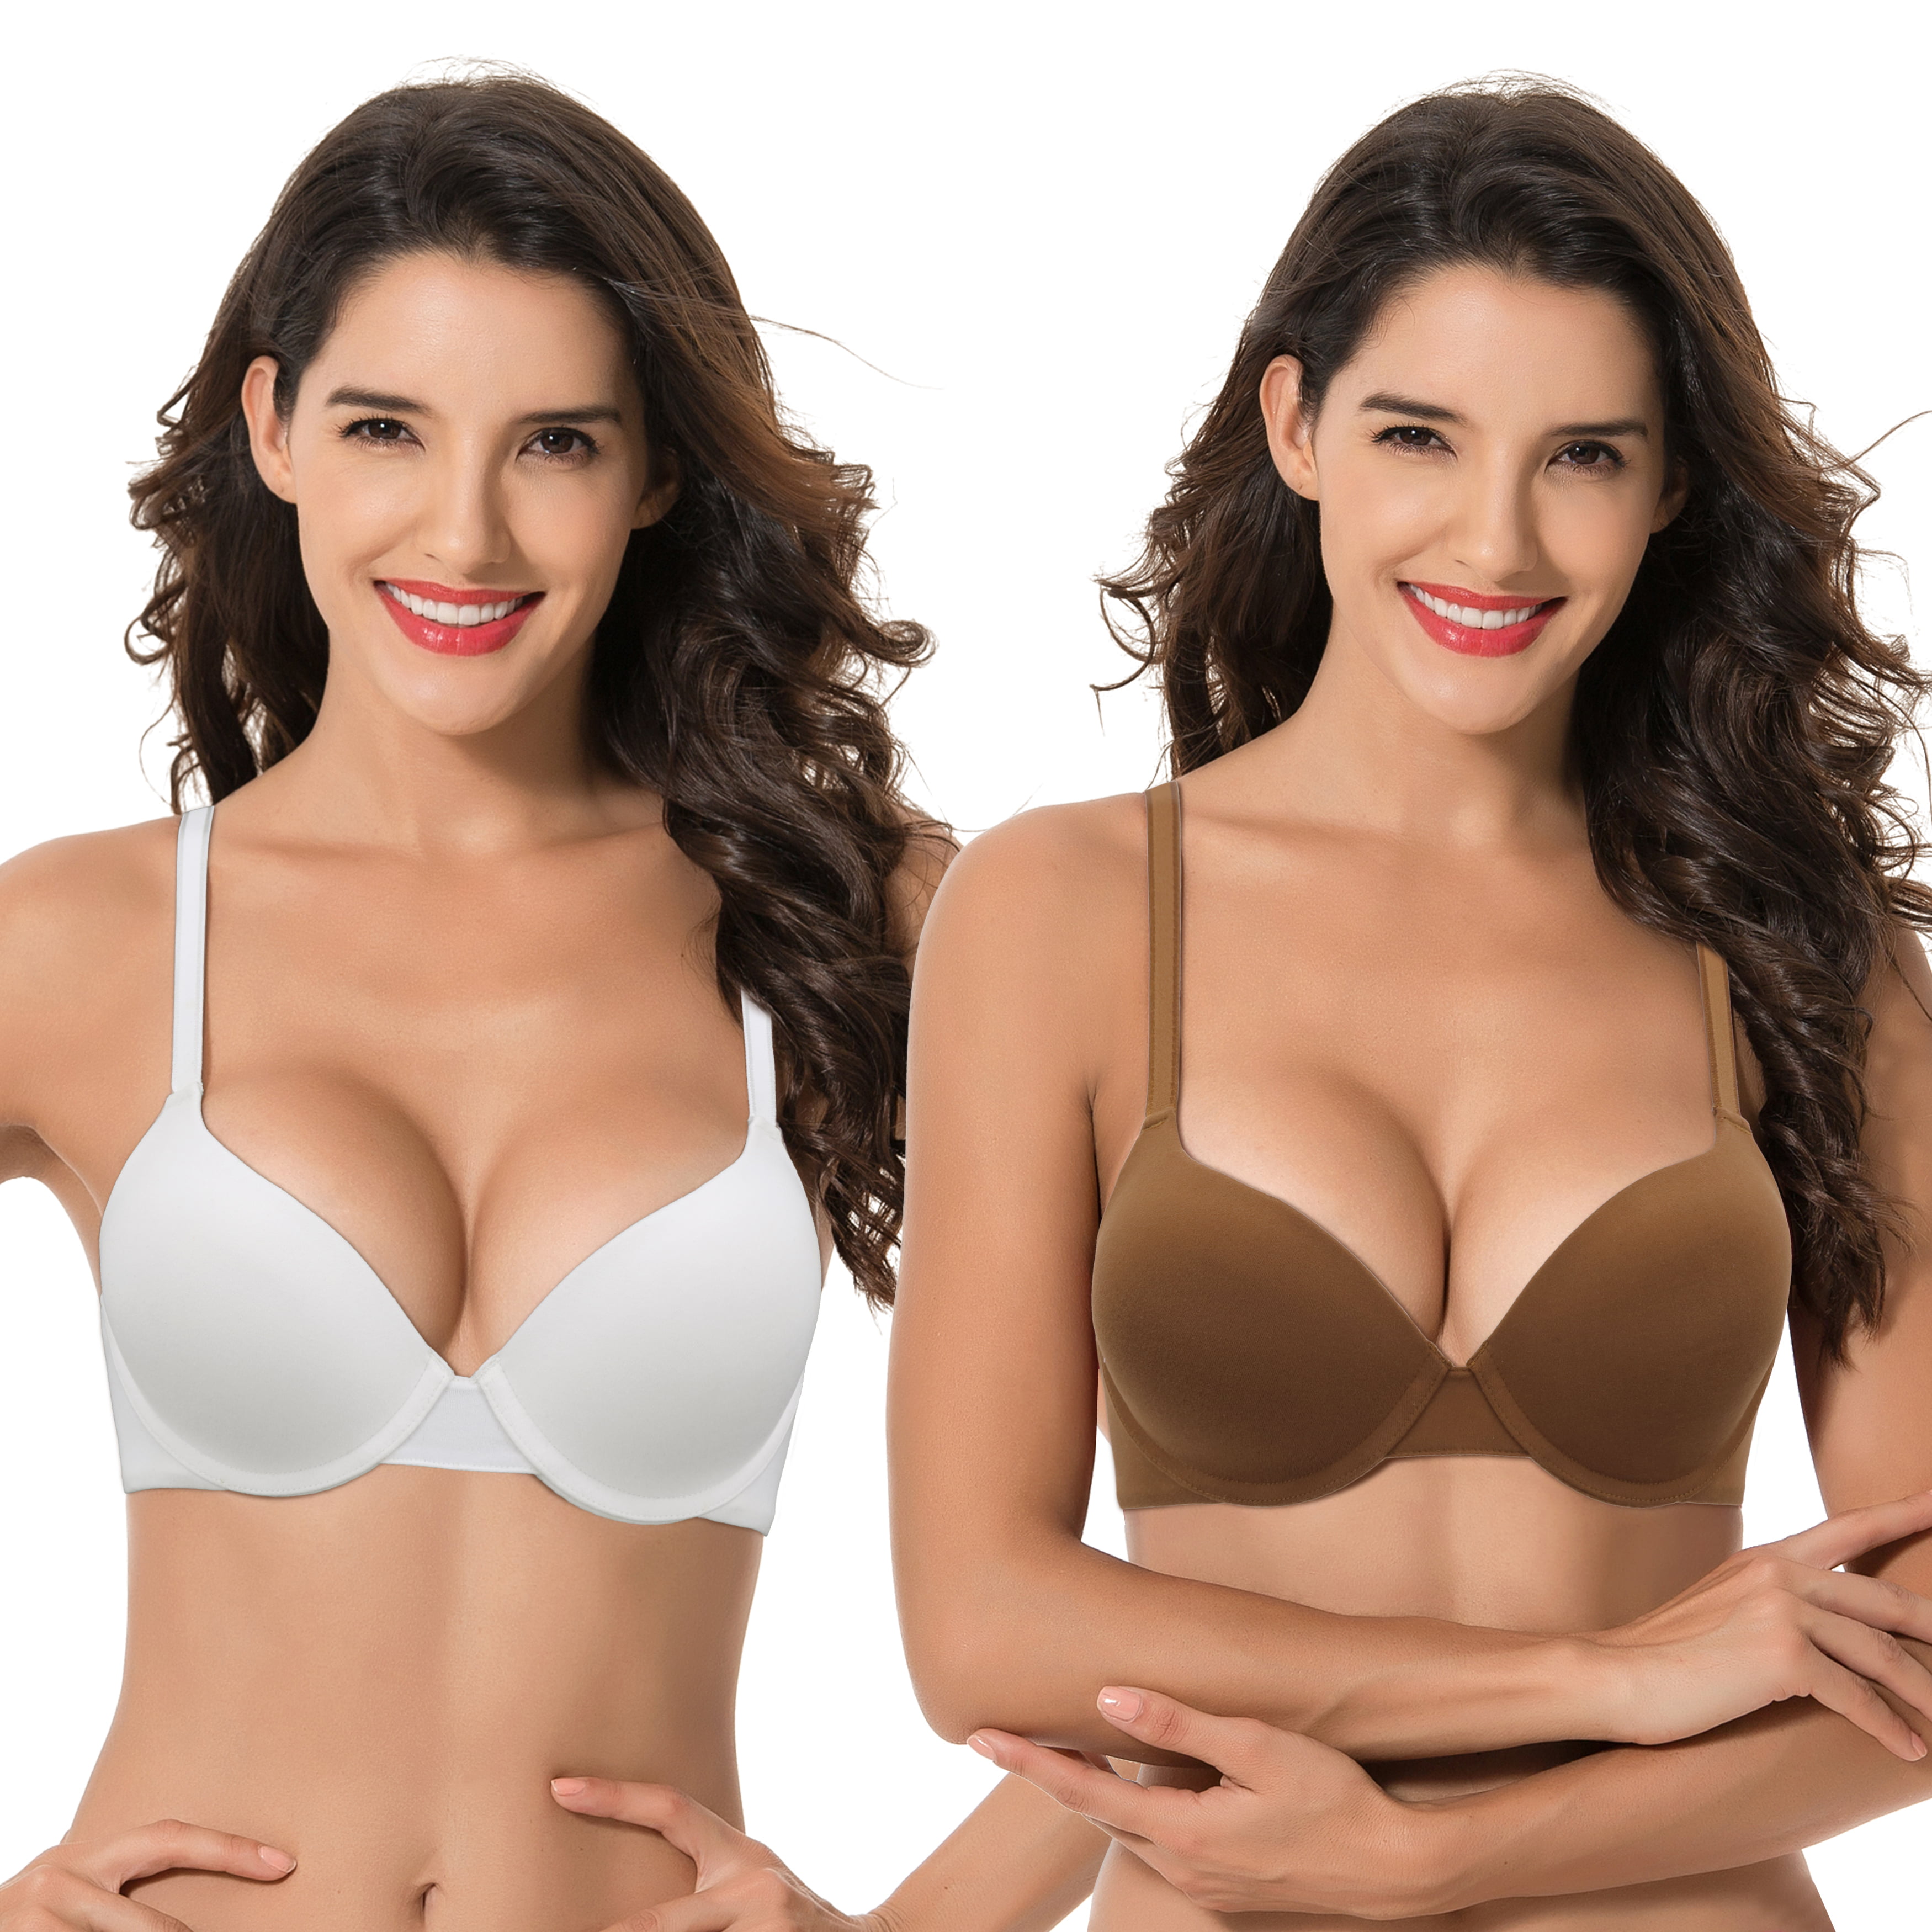 Curve Muse Women's Plus Size Full Coverage Underwire Front Close  Bras-2PK-Yellow,Grayish Brown-32DDD